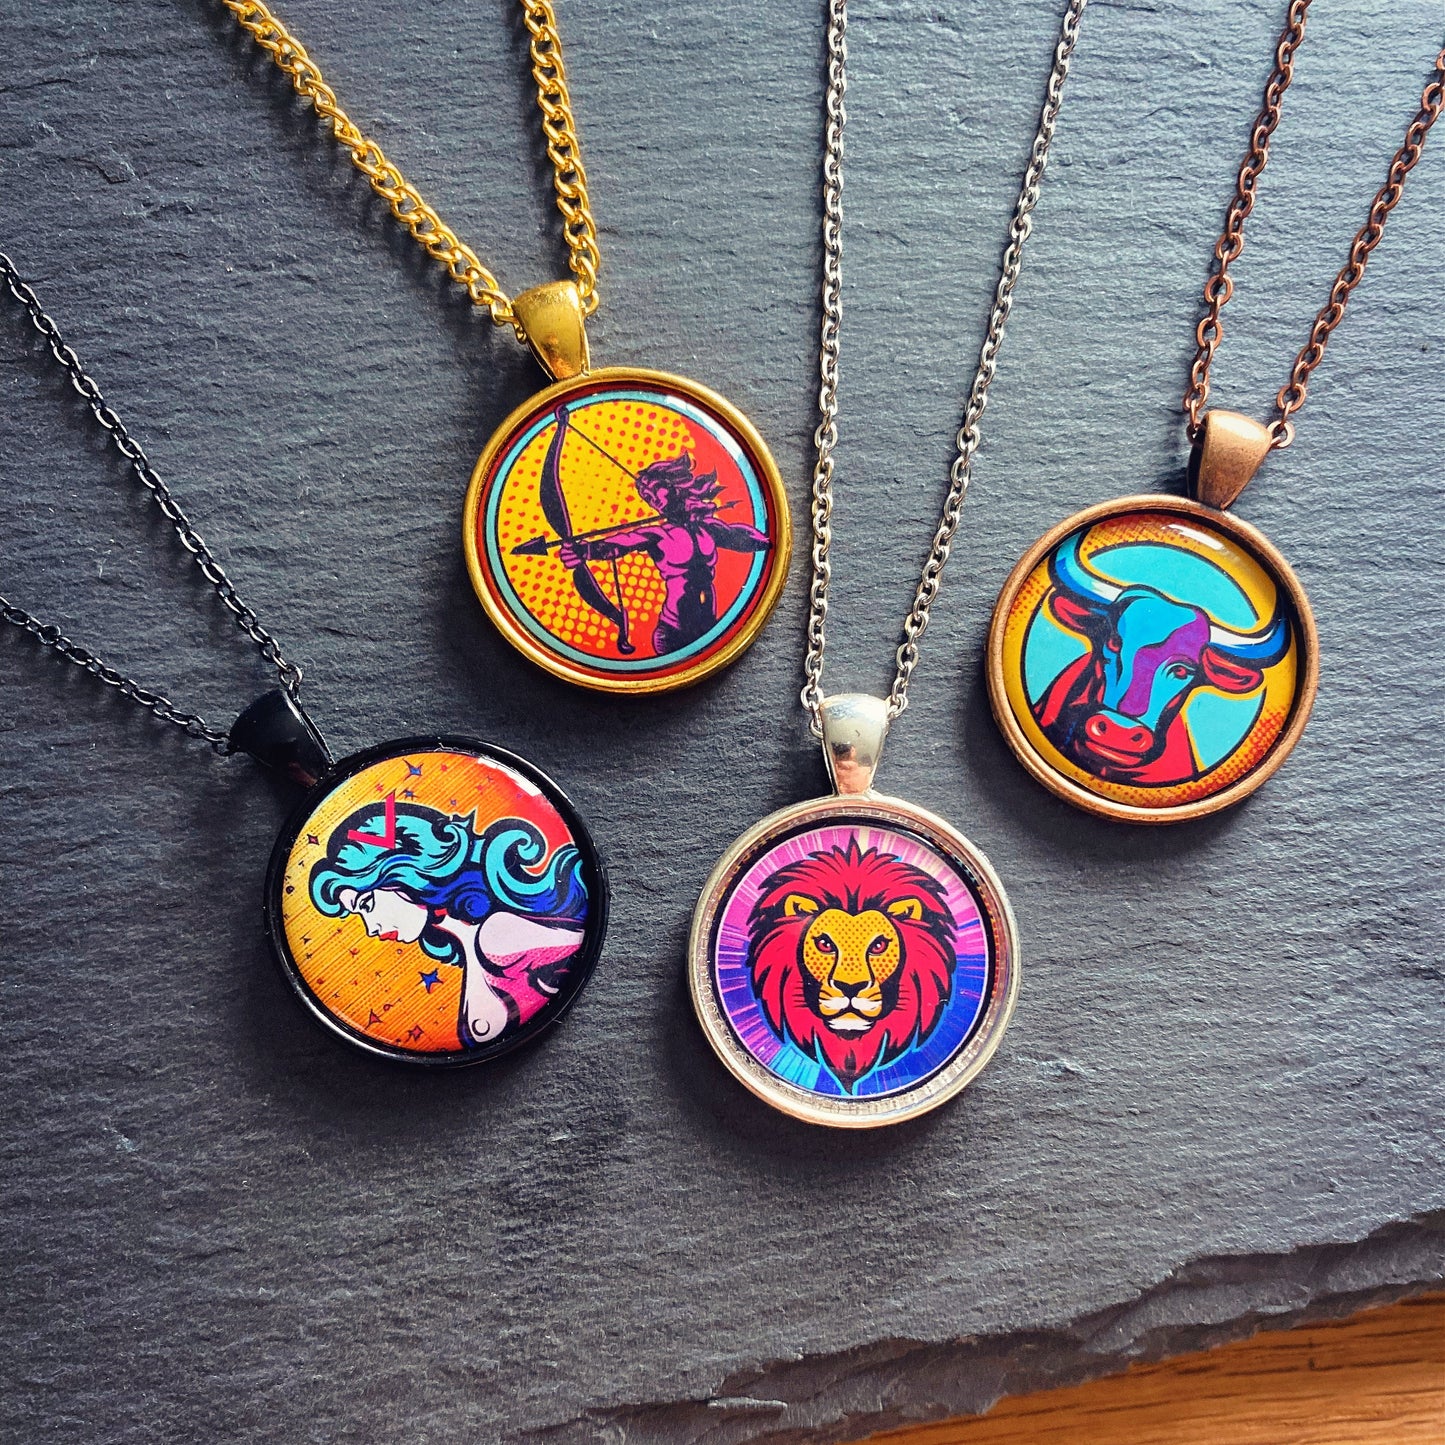 Pisces Earrings. Horoscope Symbol Necklace. Zodiac Sign Jewellery. Astrology Earrings. Pop Art Colourful Pendant. Star Sign Gift. Fish.